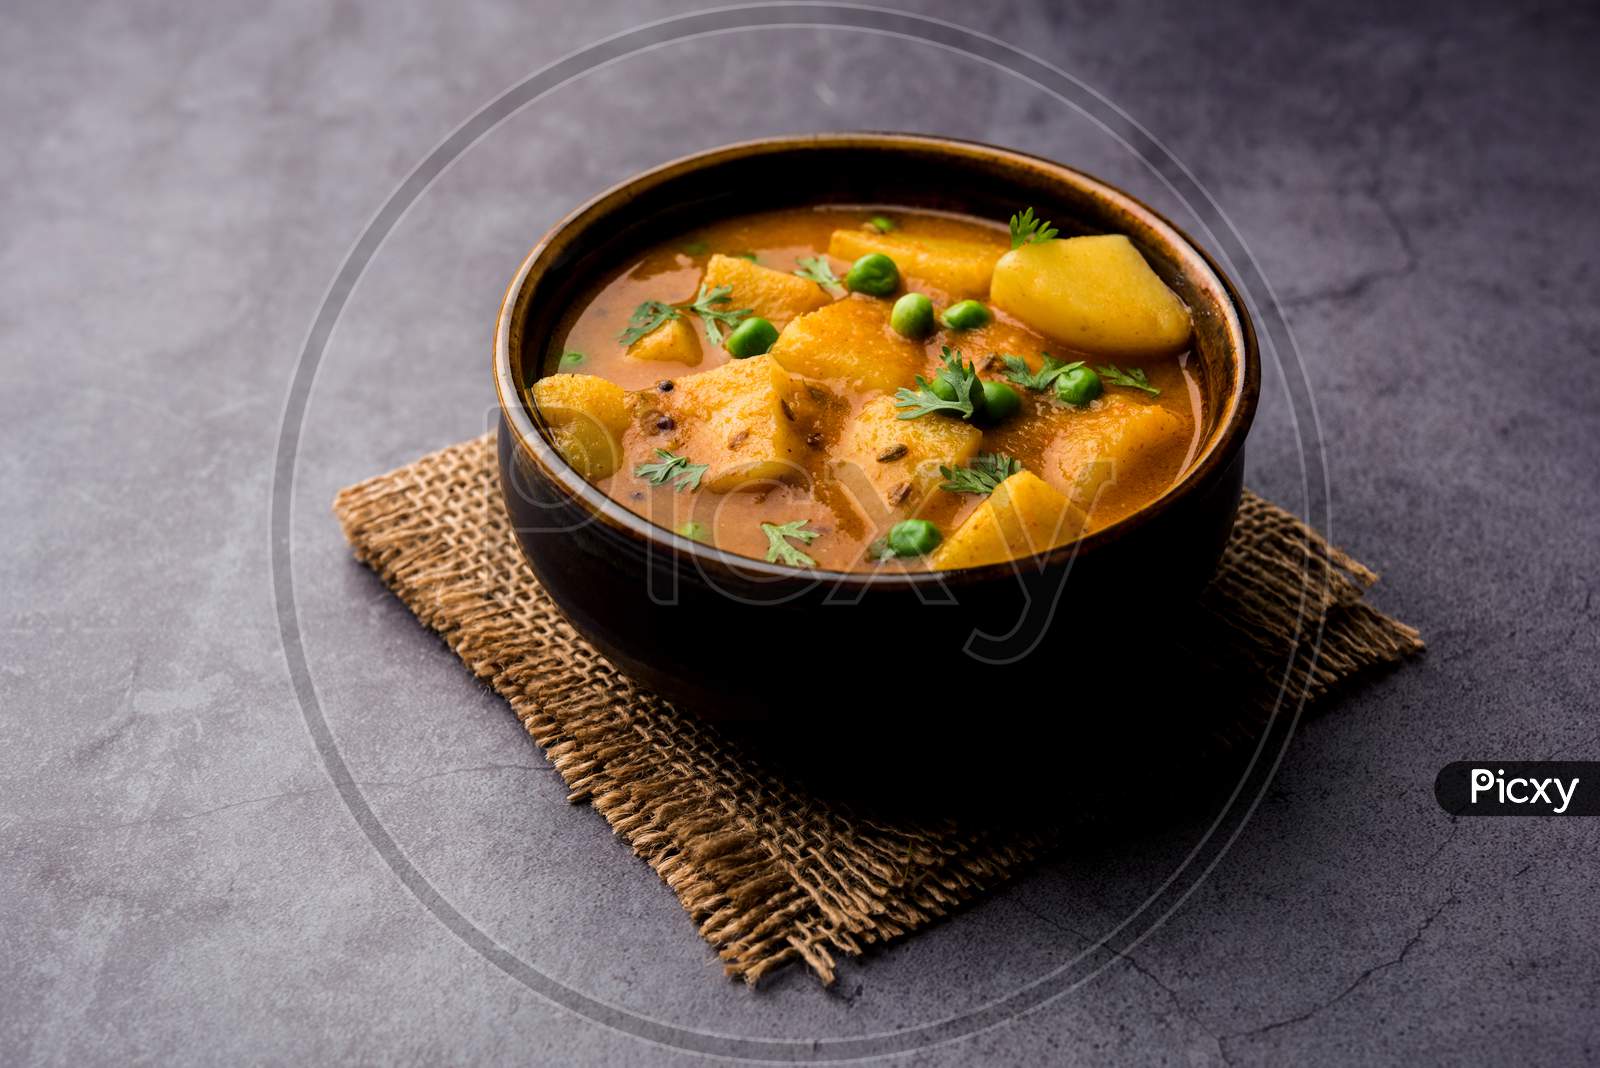 Aloo Curry Sabzi made using boiled potato with green peas. Served in a bowl or karahi, selective focus